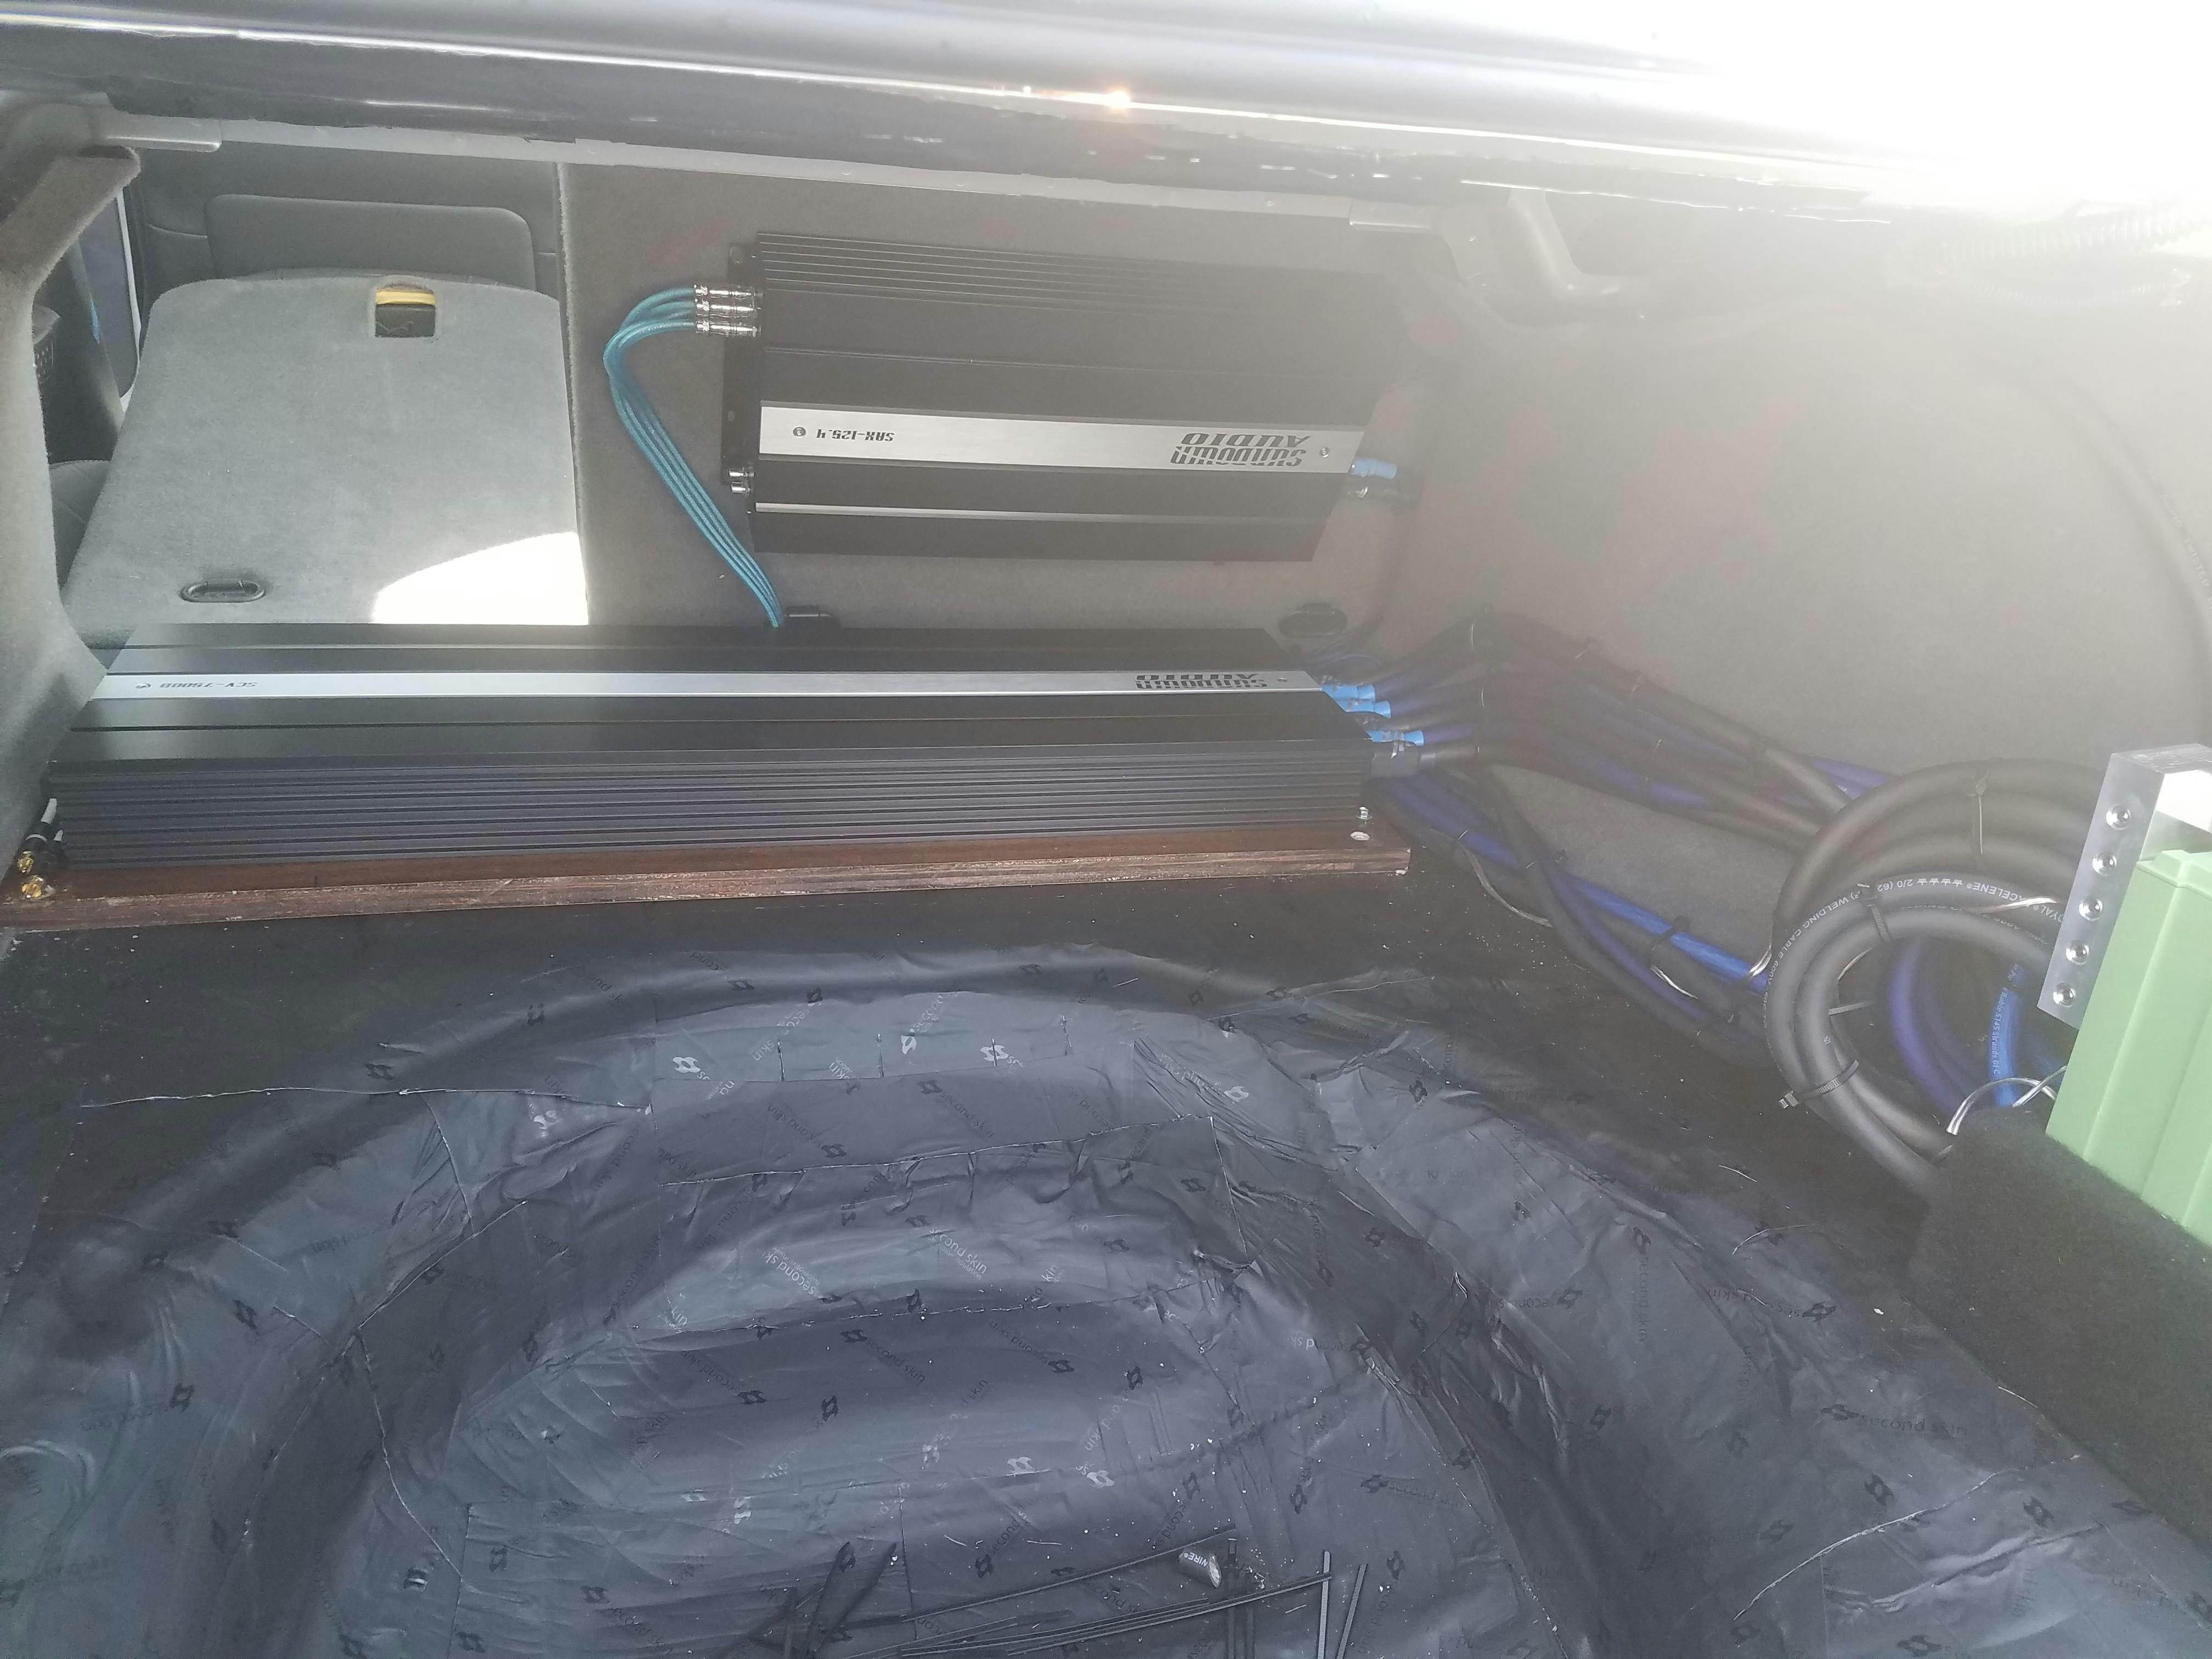 How to Install Mass Loaded Vinyl (MLV) - Second Skin Audio